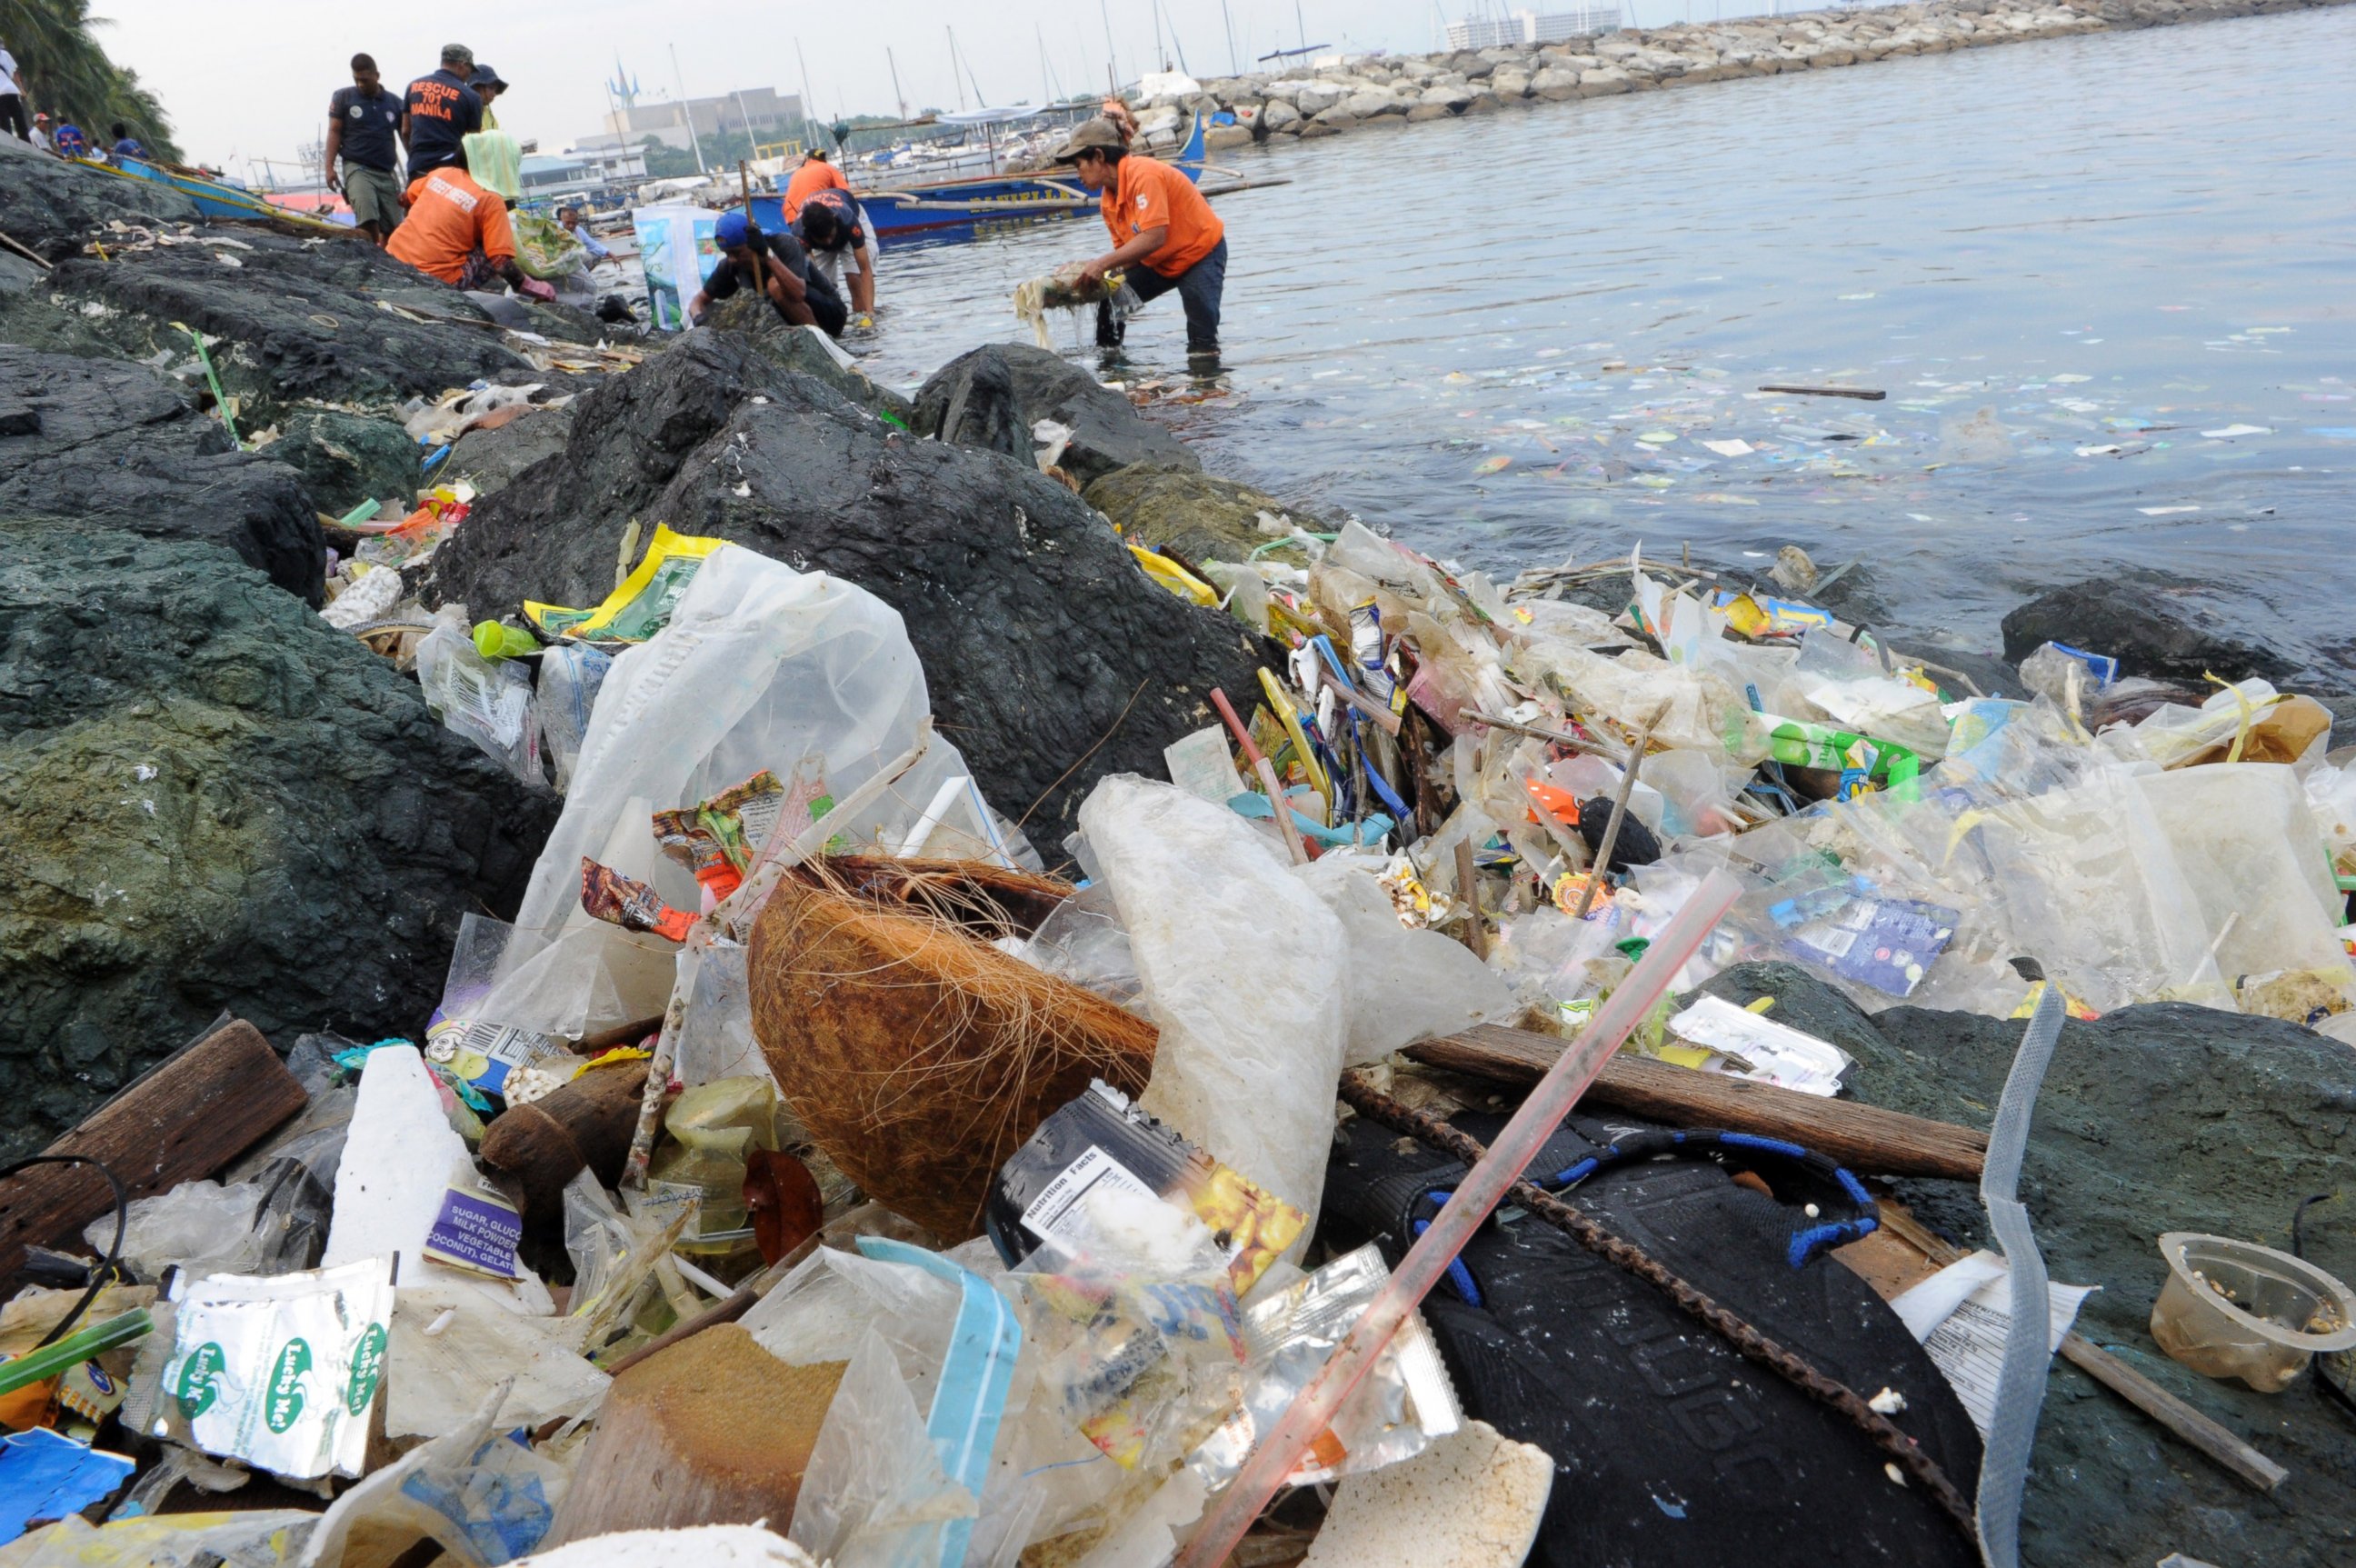 PHOTO: Plastic bags and other rubbish are collected from the waters and shoreline of Manila Bay during a campaign by environmental activists and volunteers calling for a ban of the use of plastic bags, July 3, 2014